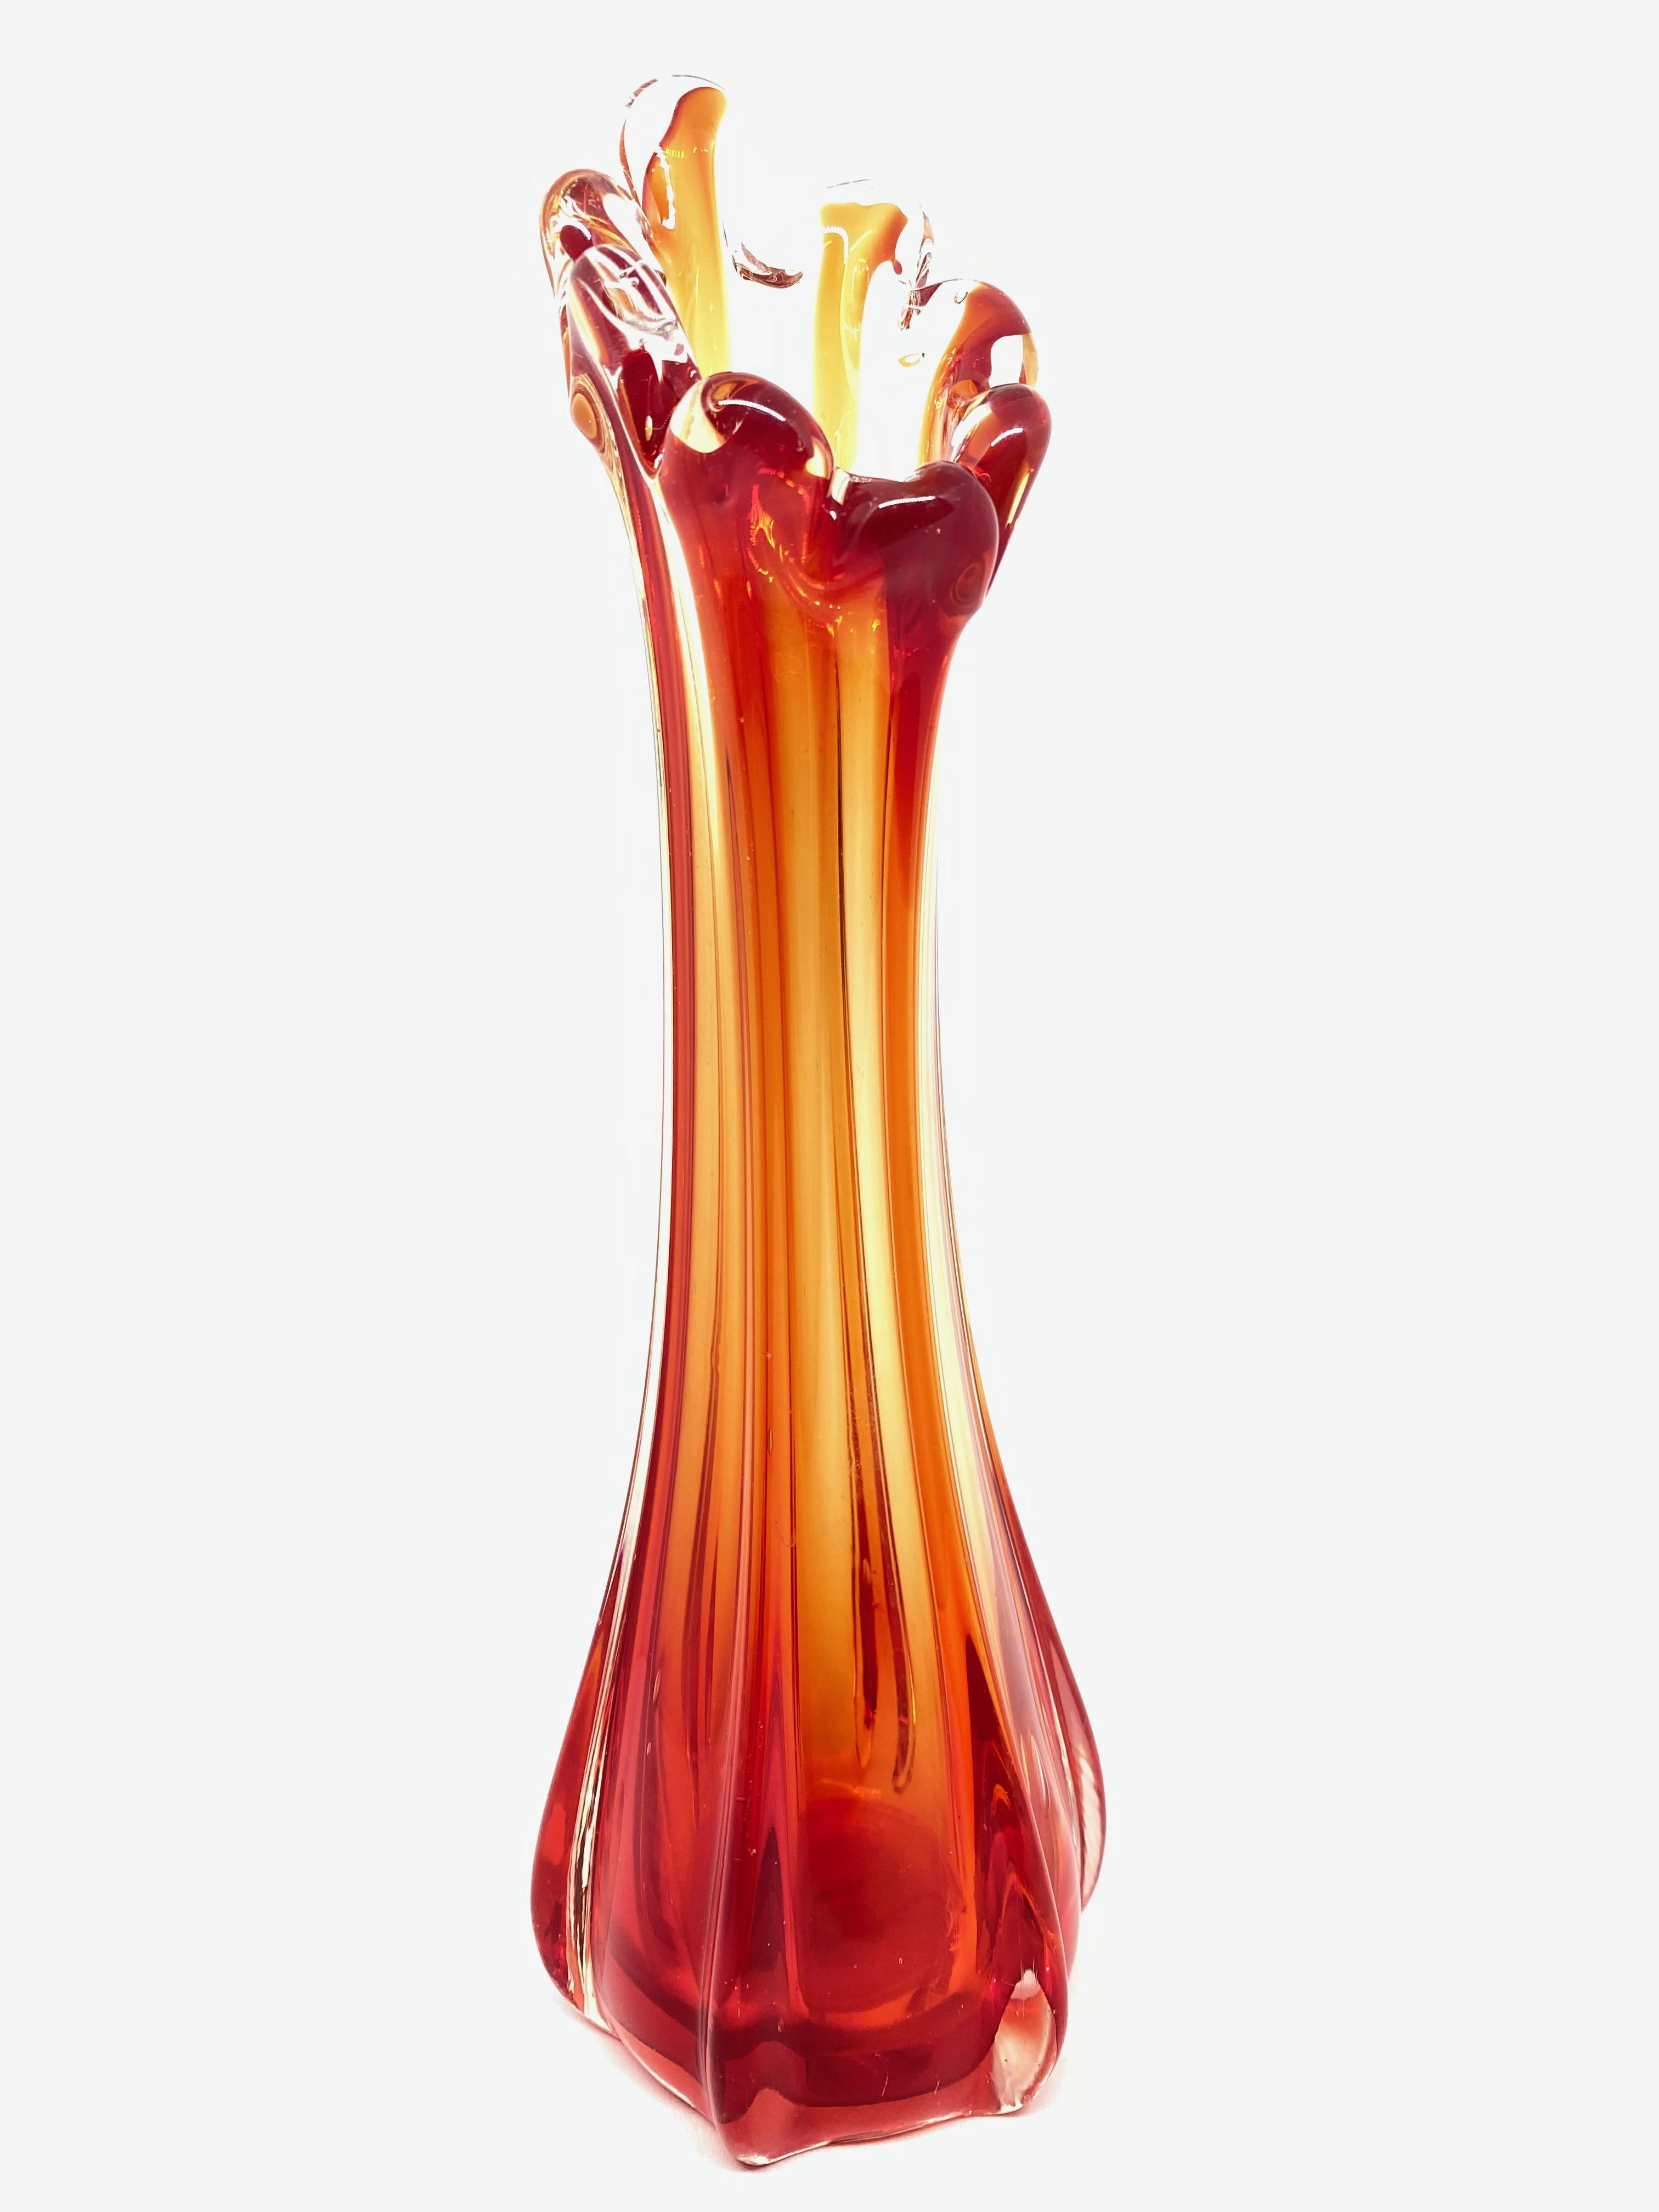 Beautiful Murano hand blown Italian art glass vase. Created by a Murano glass company. A beautiful piece of art for any room.